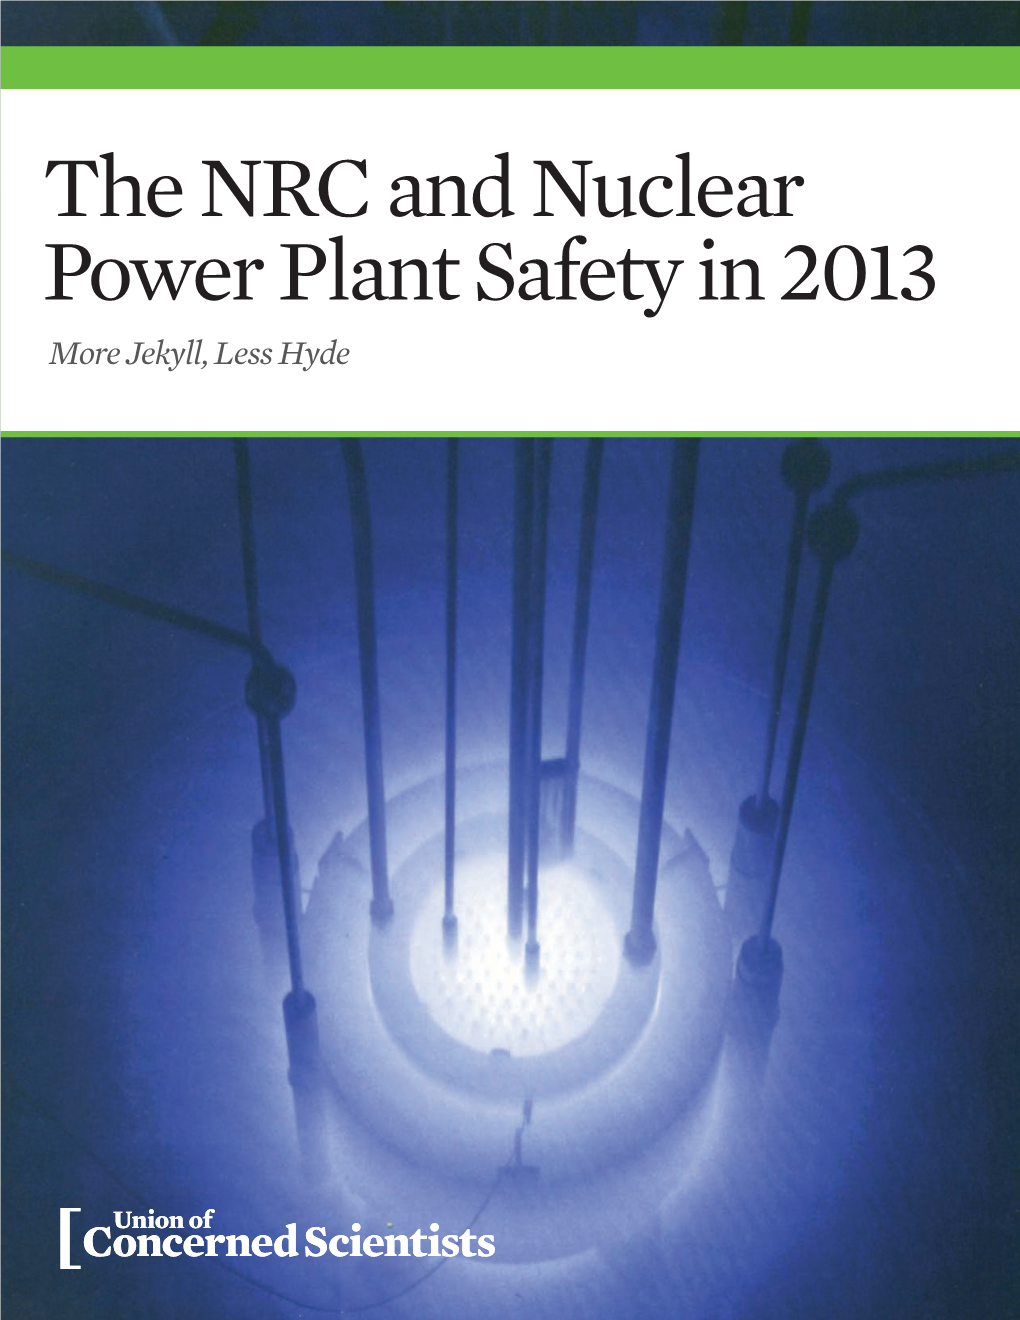 The NRC and Nuclear Power Plant Safety in 2013 More Jekyll, Less Hyde